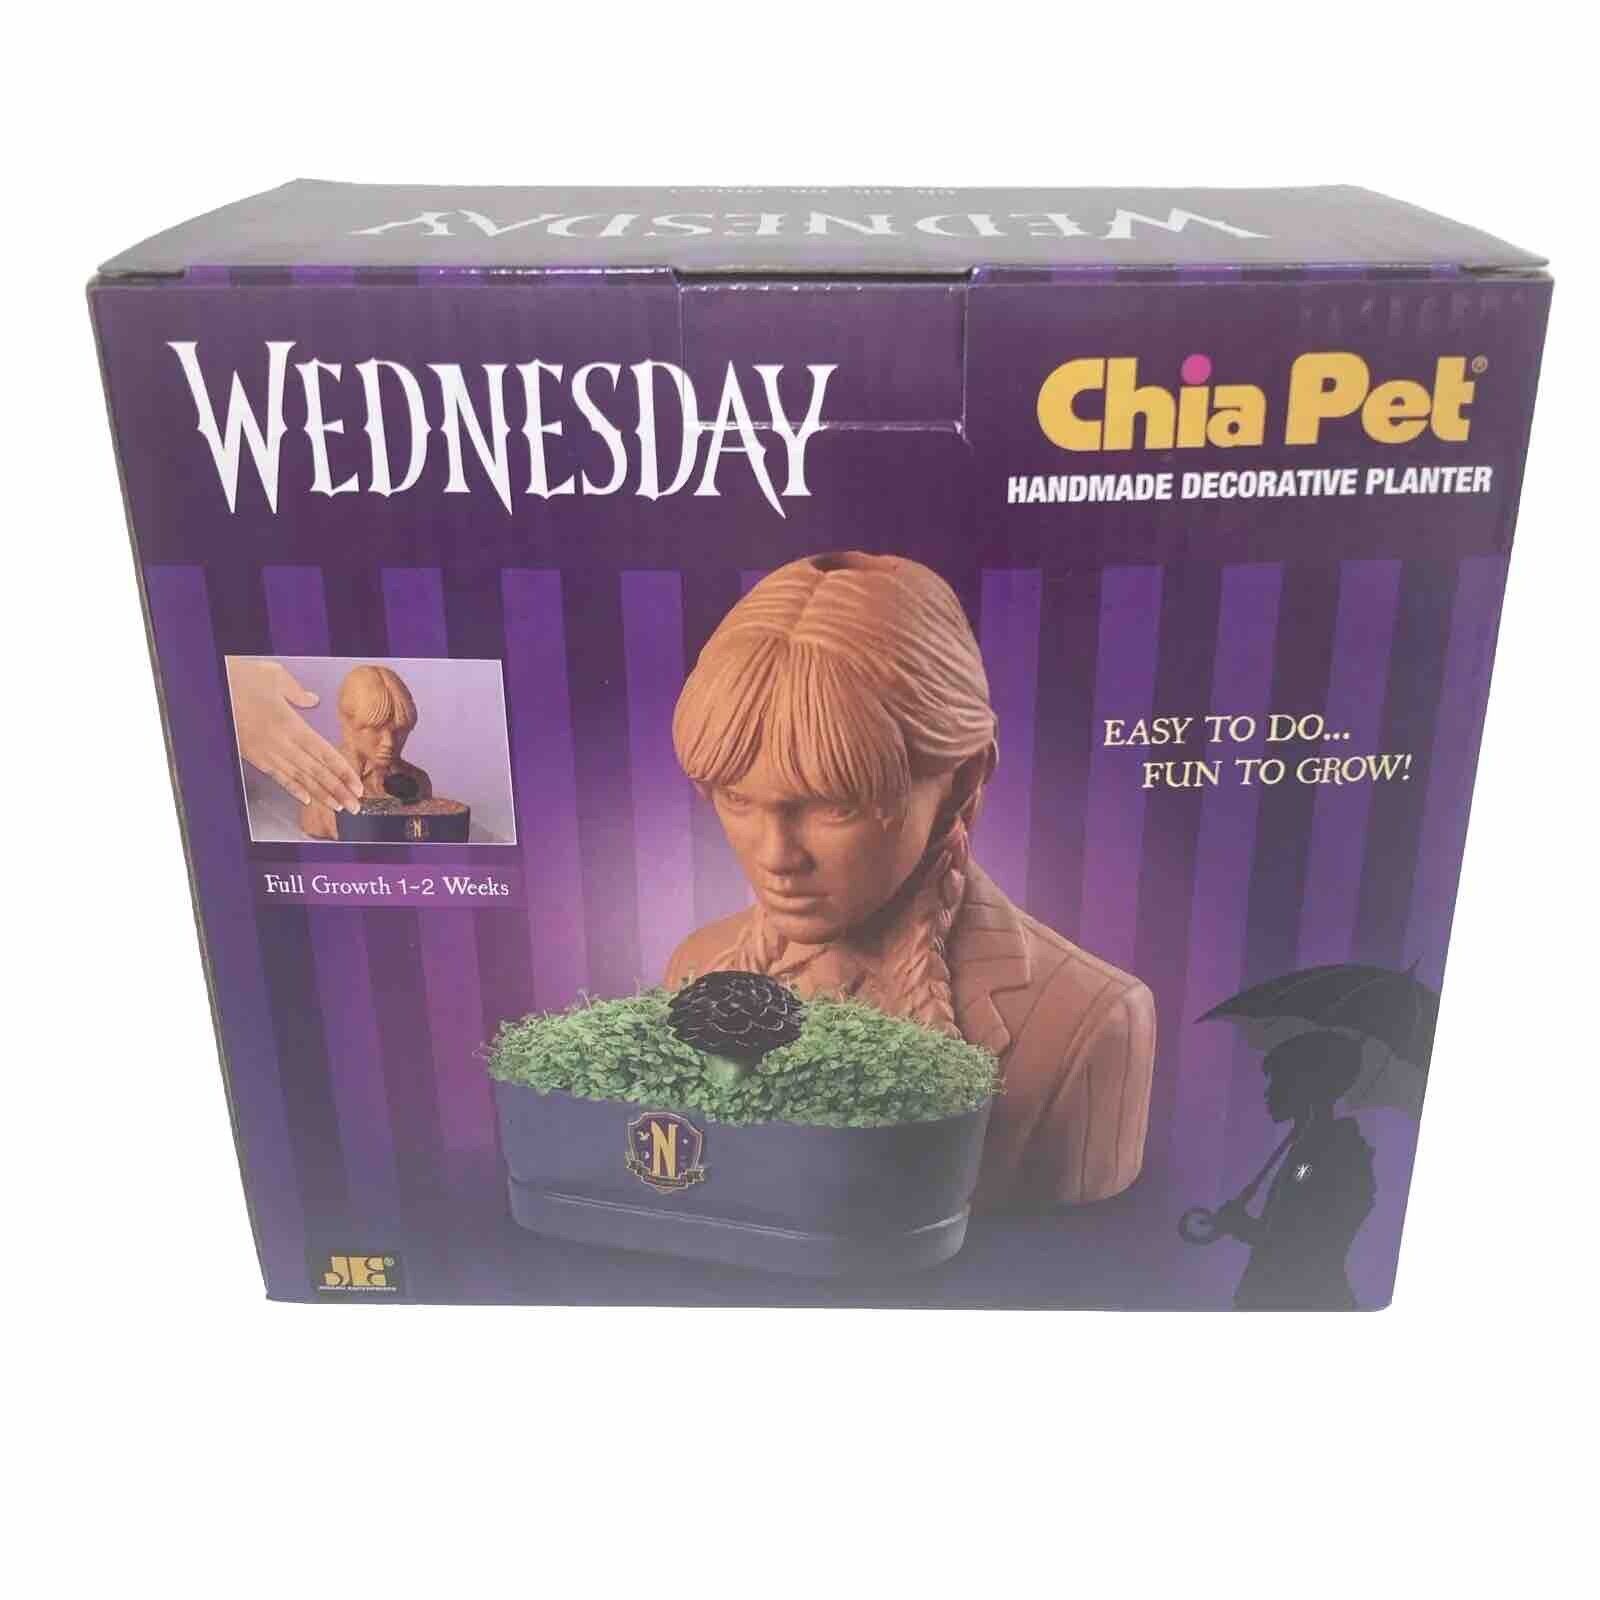 Chia Pet Wednesday with Seed Pack Decorative Pottery Planter The Addams Family